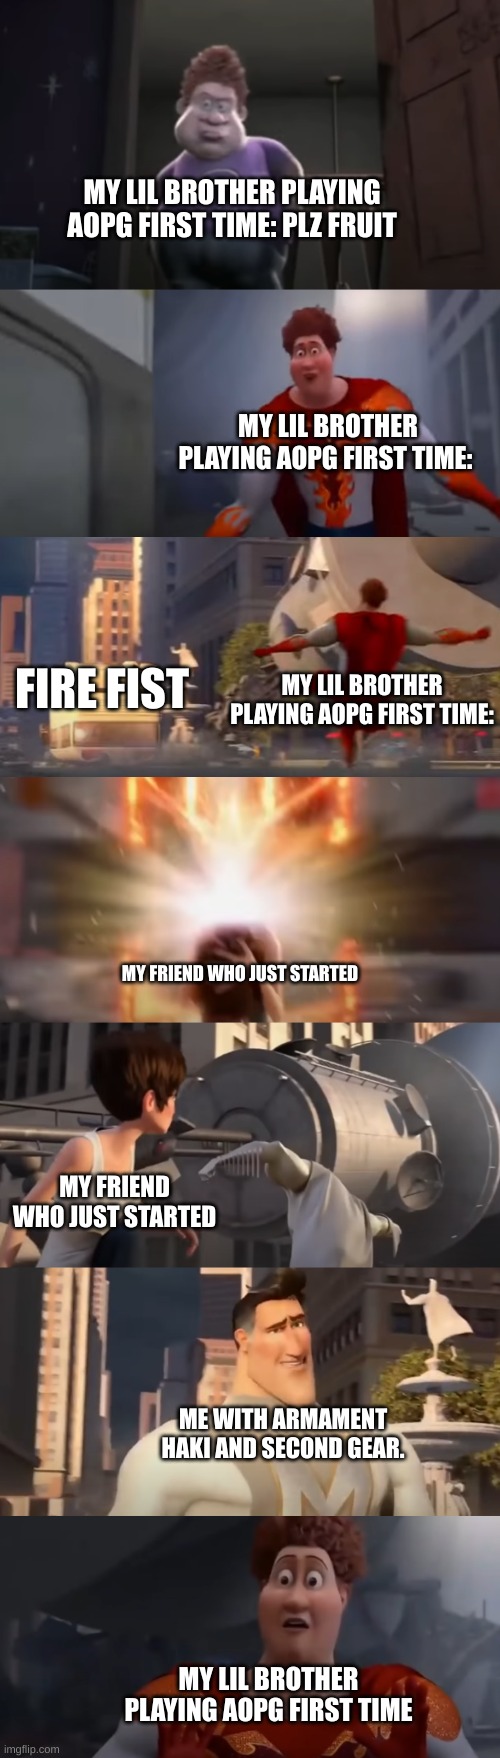 Snotty Boy Glow Up Meme extended | MY LIL BROTHER PLAYING AOPG FIRST TIME: PLZ FRUIT; MY LIL BROTHER PLAYING AOPG FIRST TIME:; FIRE FIST; MY LIL BROTHER PLAYING AOPG FIRST TIME:; MY FRIEND WHO JUST STARTED; MY FRIEND WHO JUST STARTED; ME WITH ARMAMENT HAKI AND SECOND GEAR. MY LIL BROTHER PLAYING AOPG FIRST TIME | image tagged in snotty boy glow up meme extended | made w/ Imgflip meme maker